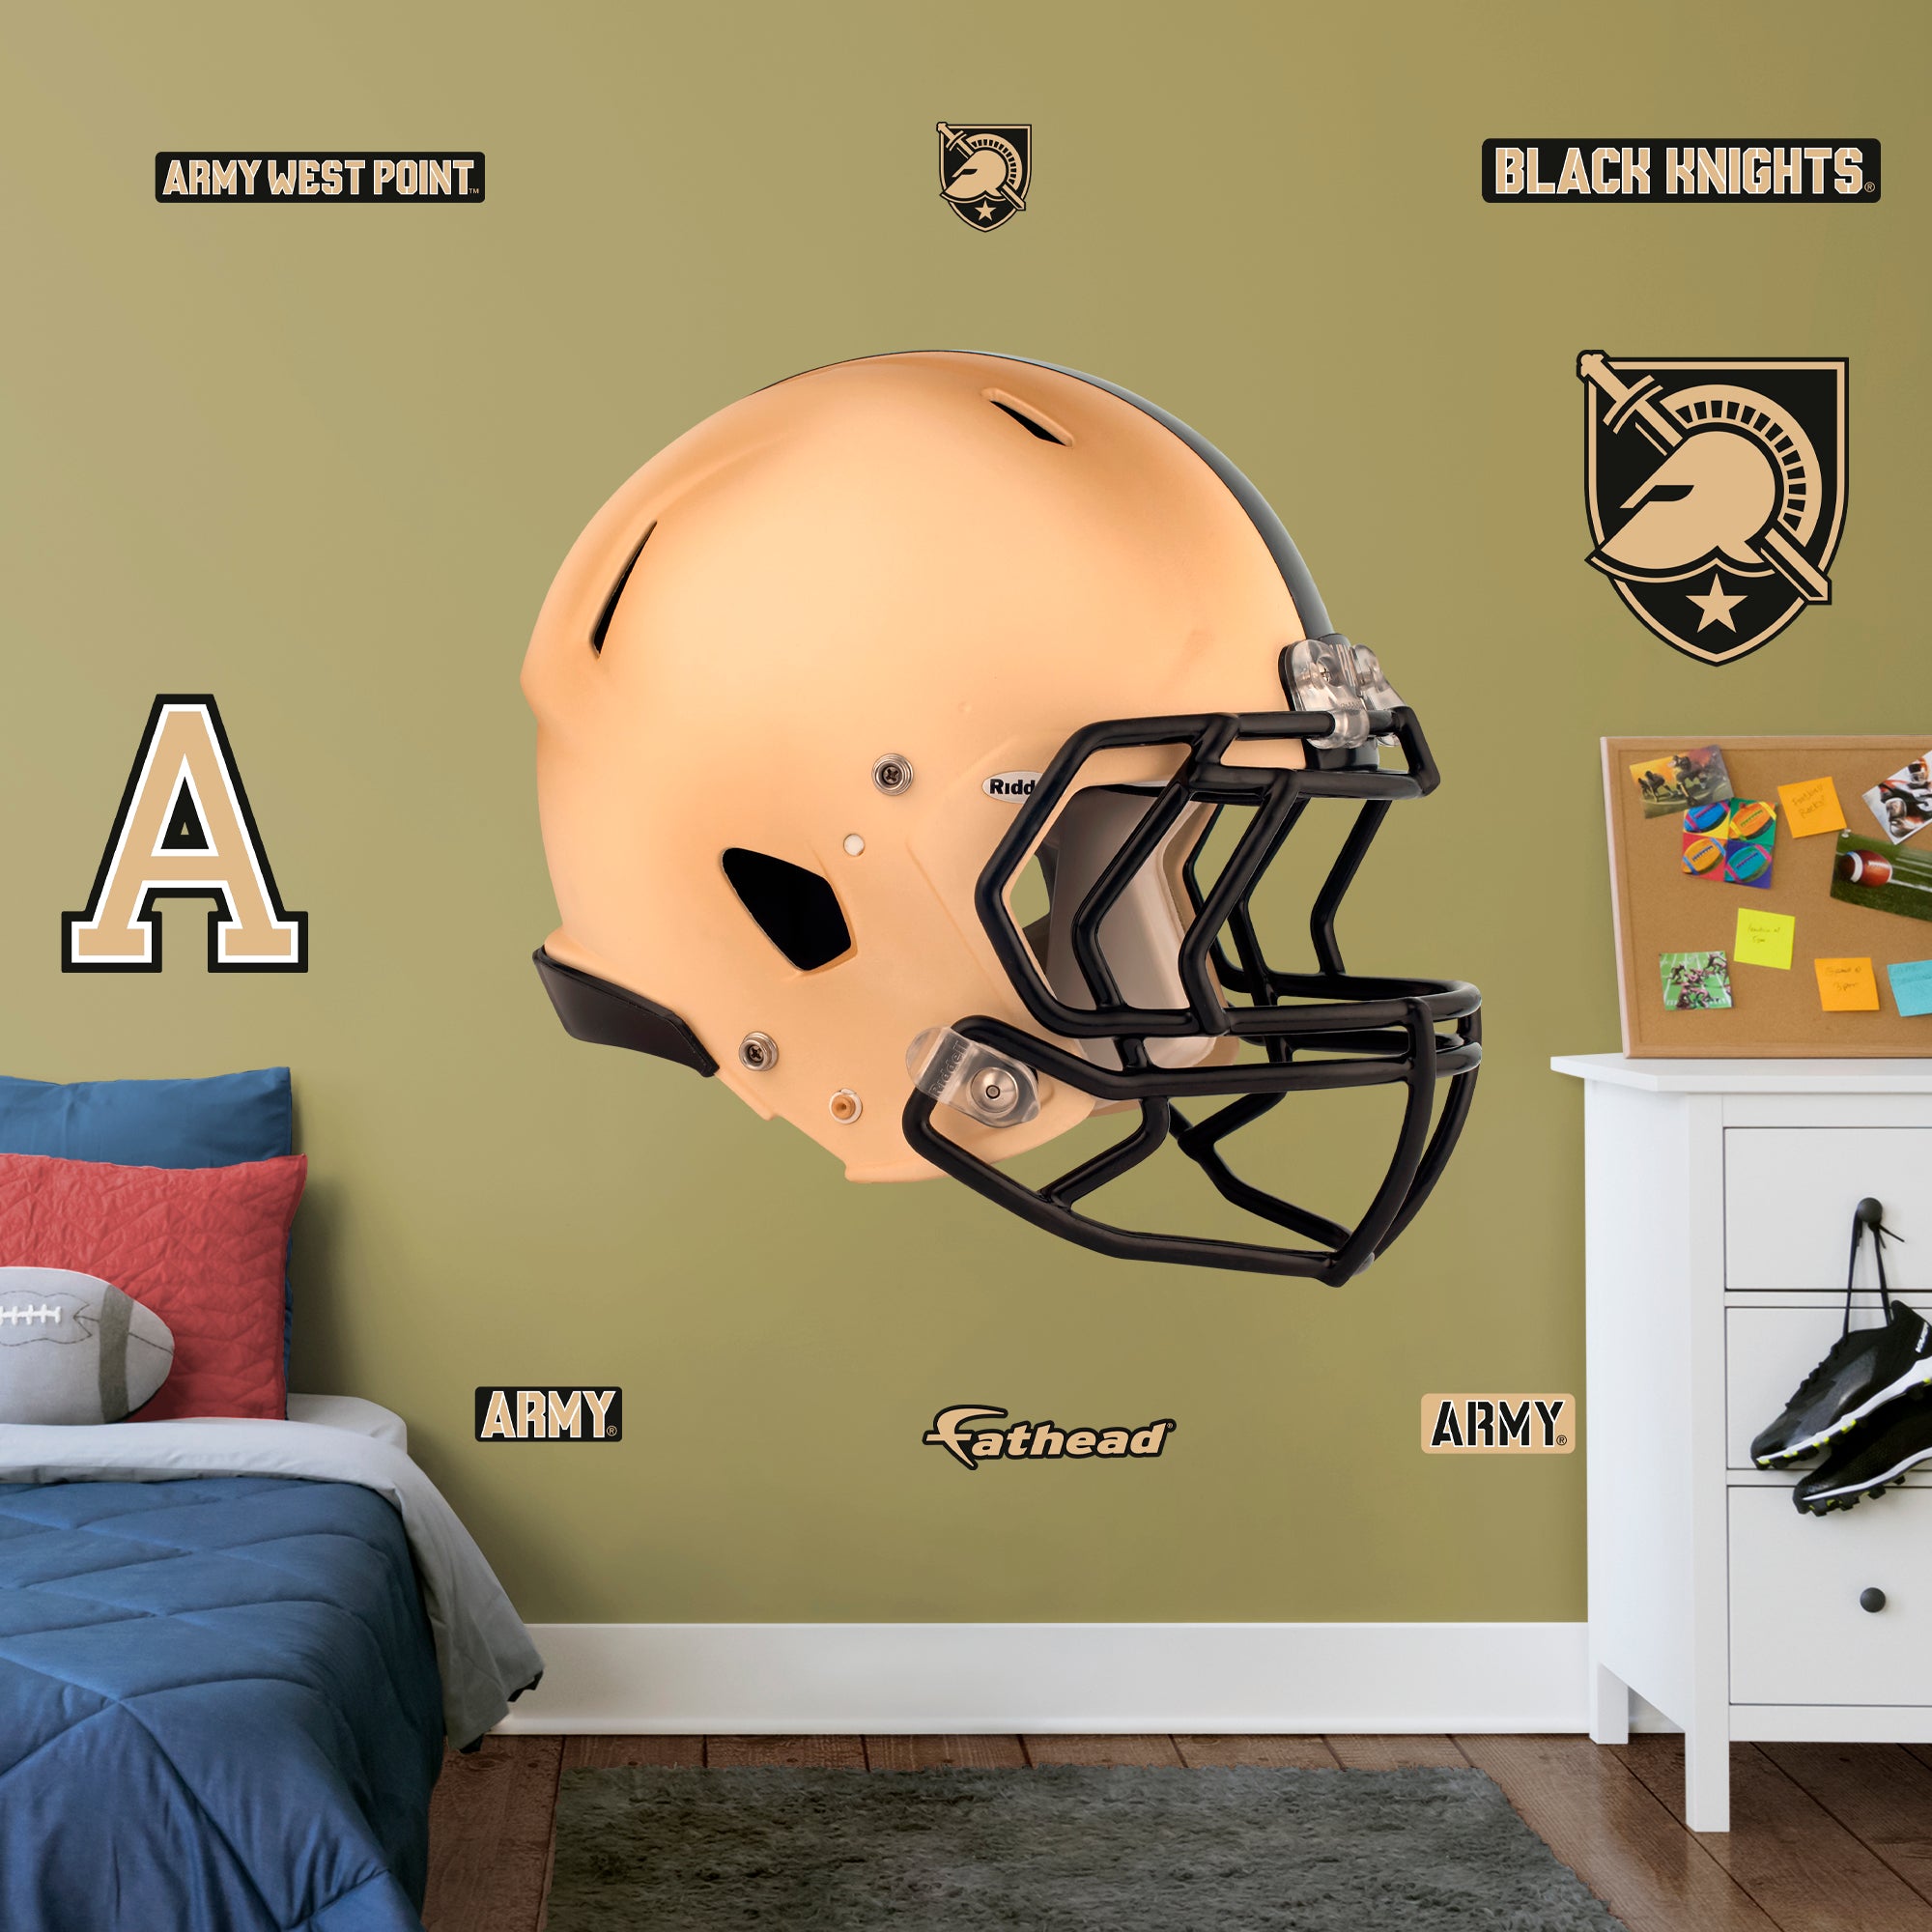 Army Black Knights 2020 RealBig Helmet - Officially Licensed NCAA Removable Wall Decal Giant Decal (57"W x 46"H) by Fathead | Vi